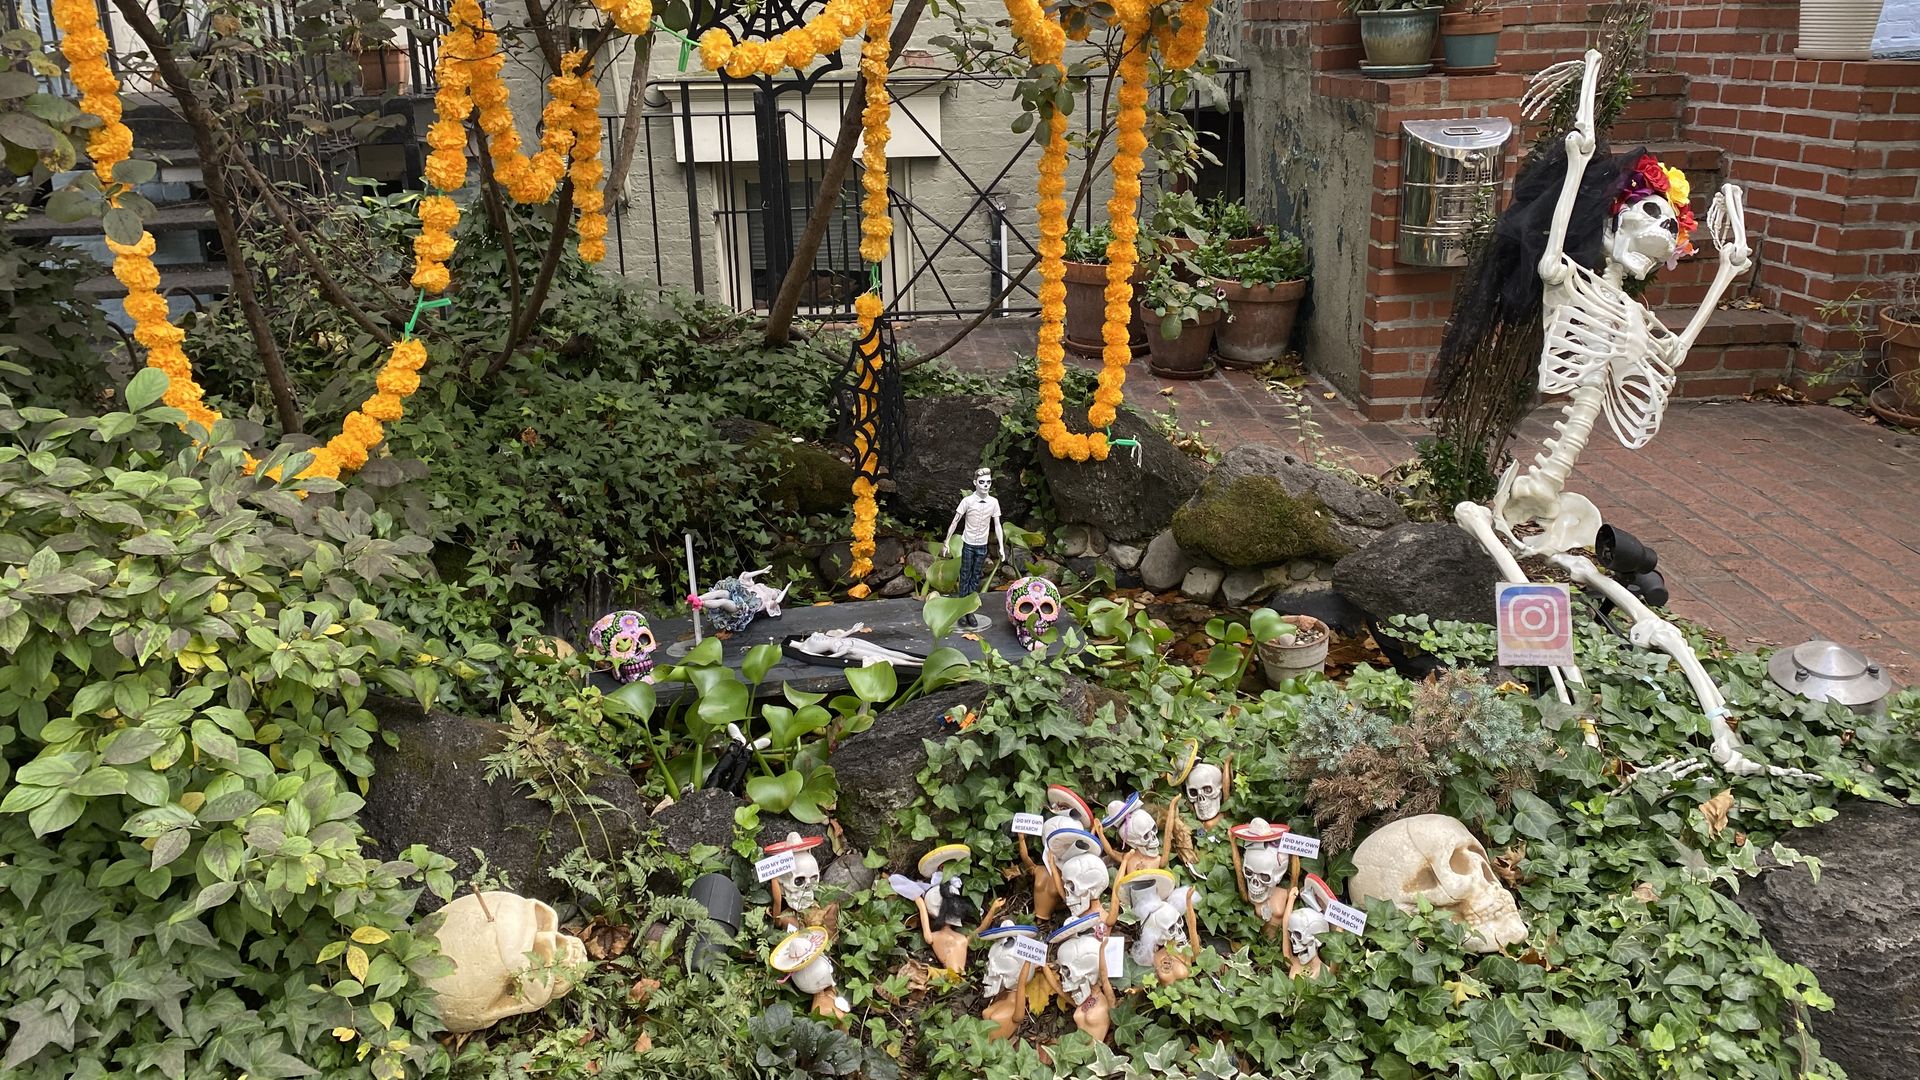 Barbie Pond has a display of naked Barbies dressed for Day of the Dead. 